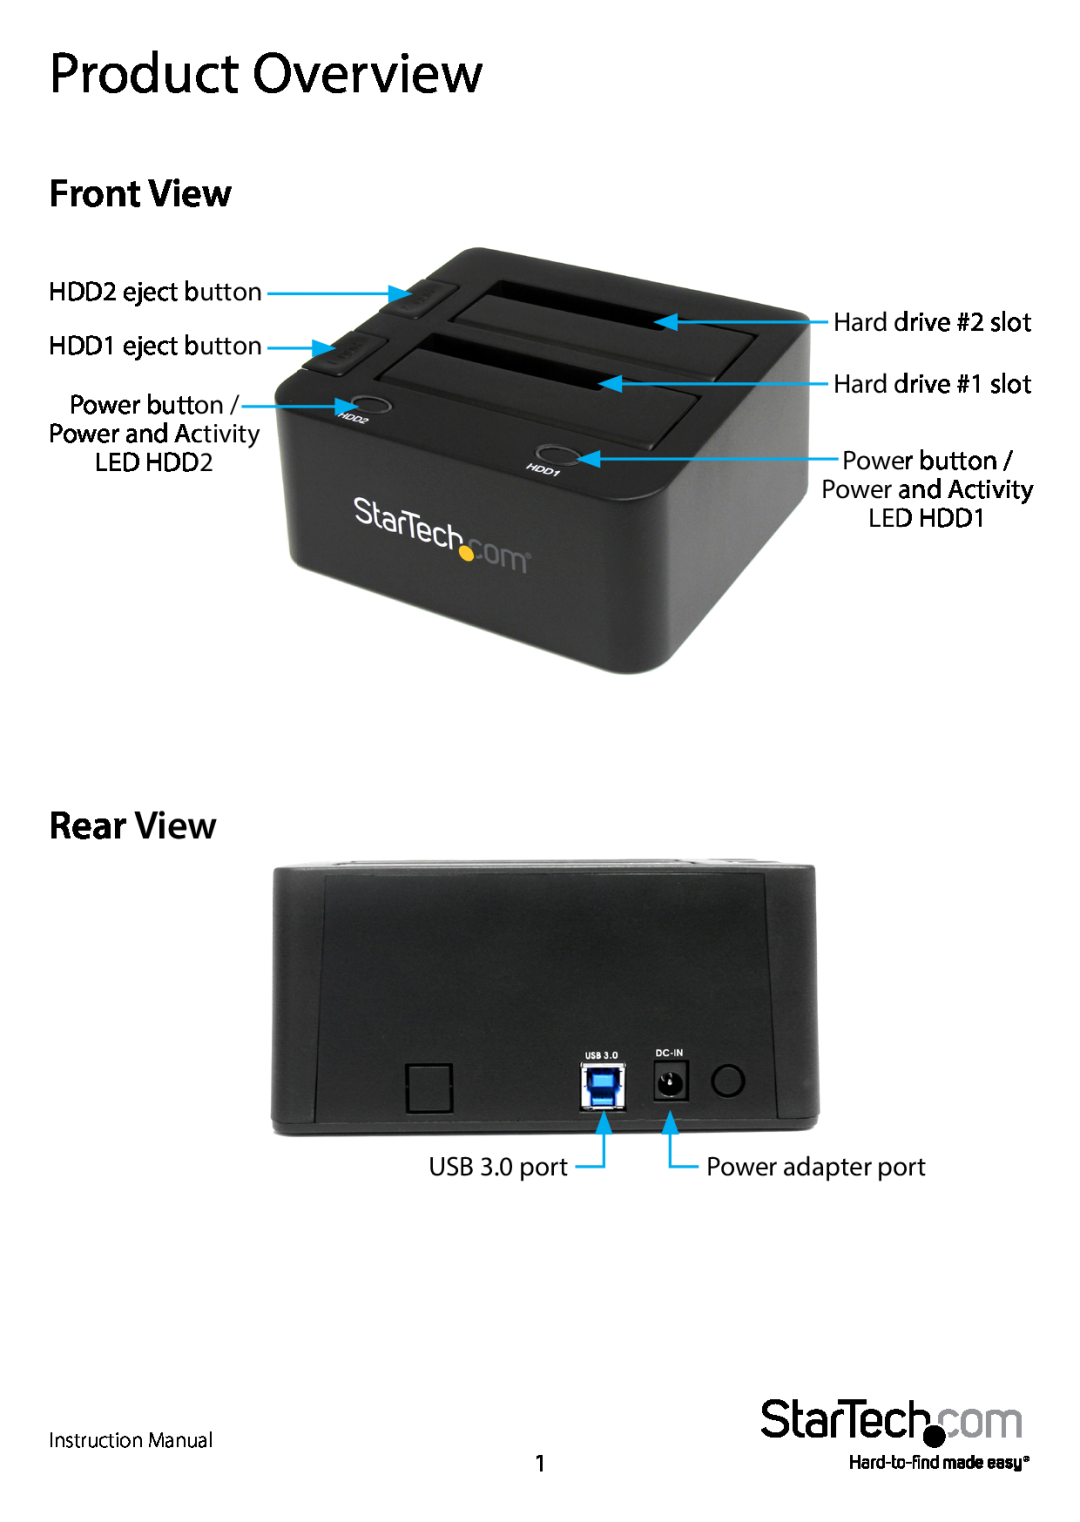 StarTech.com usb 3.0 to dual 2.5/3.5in sata hdd dock with uasp manual Product Overview, Front View, Rear View 